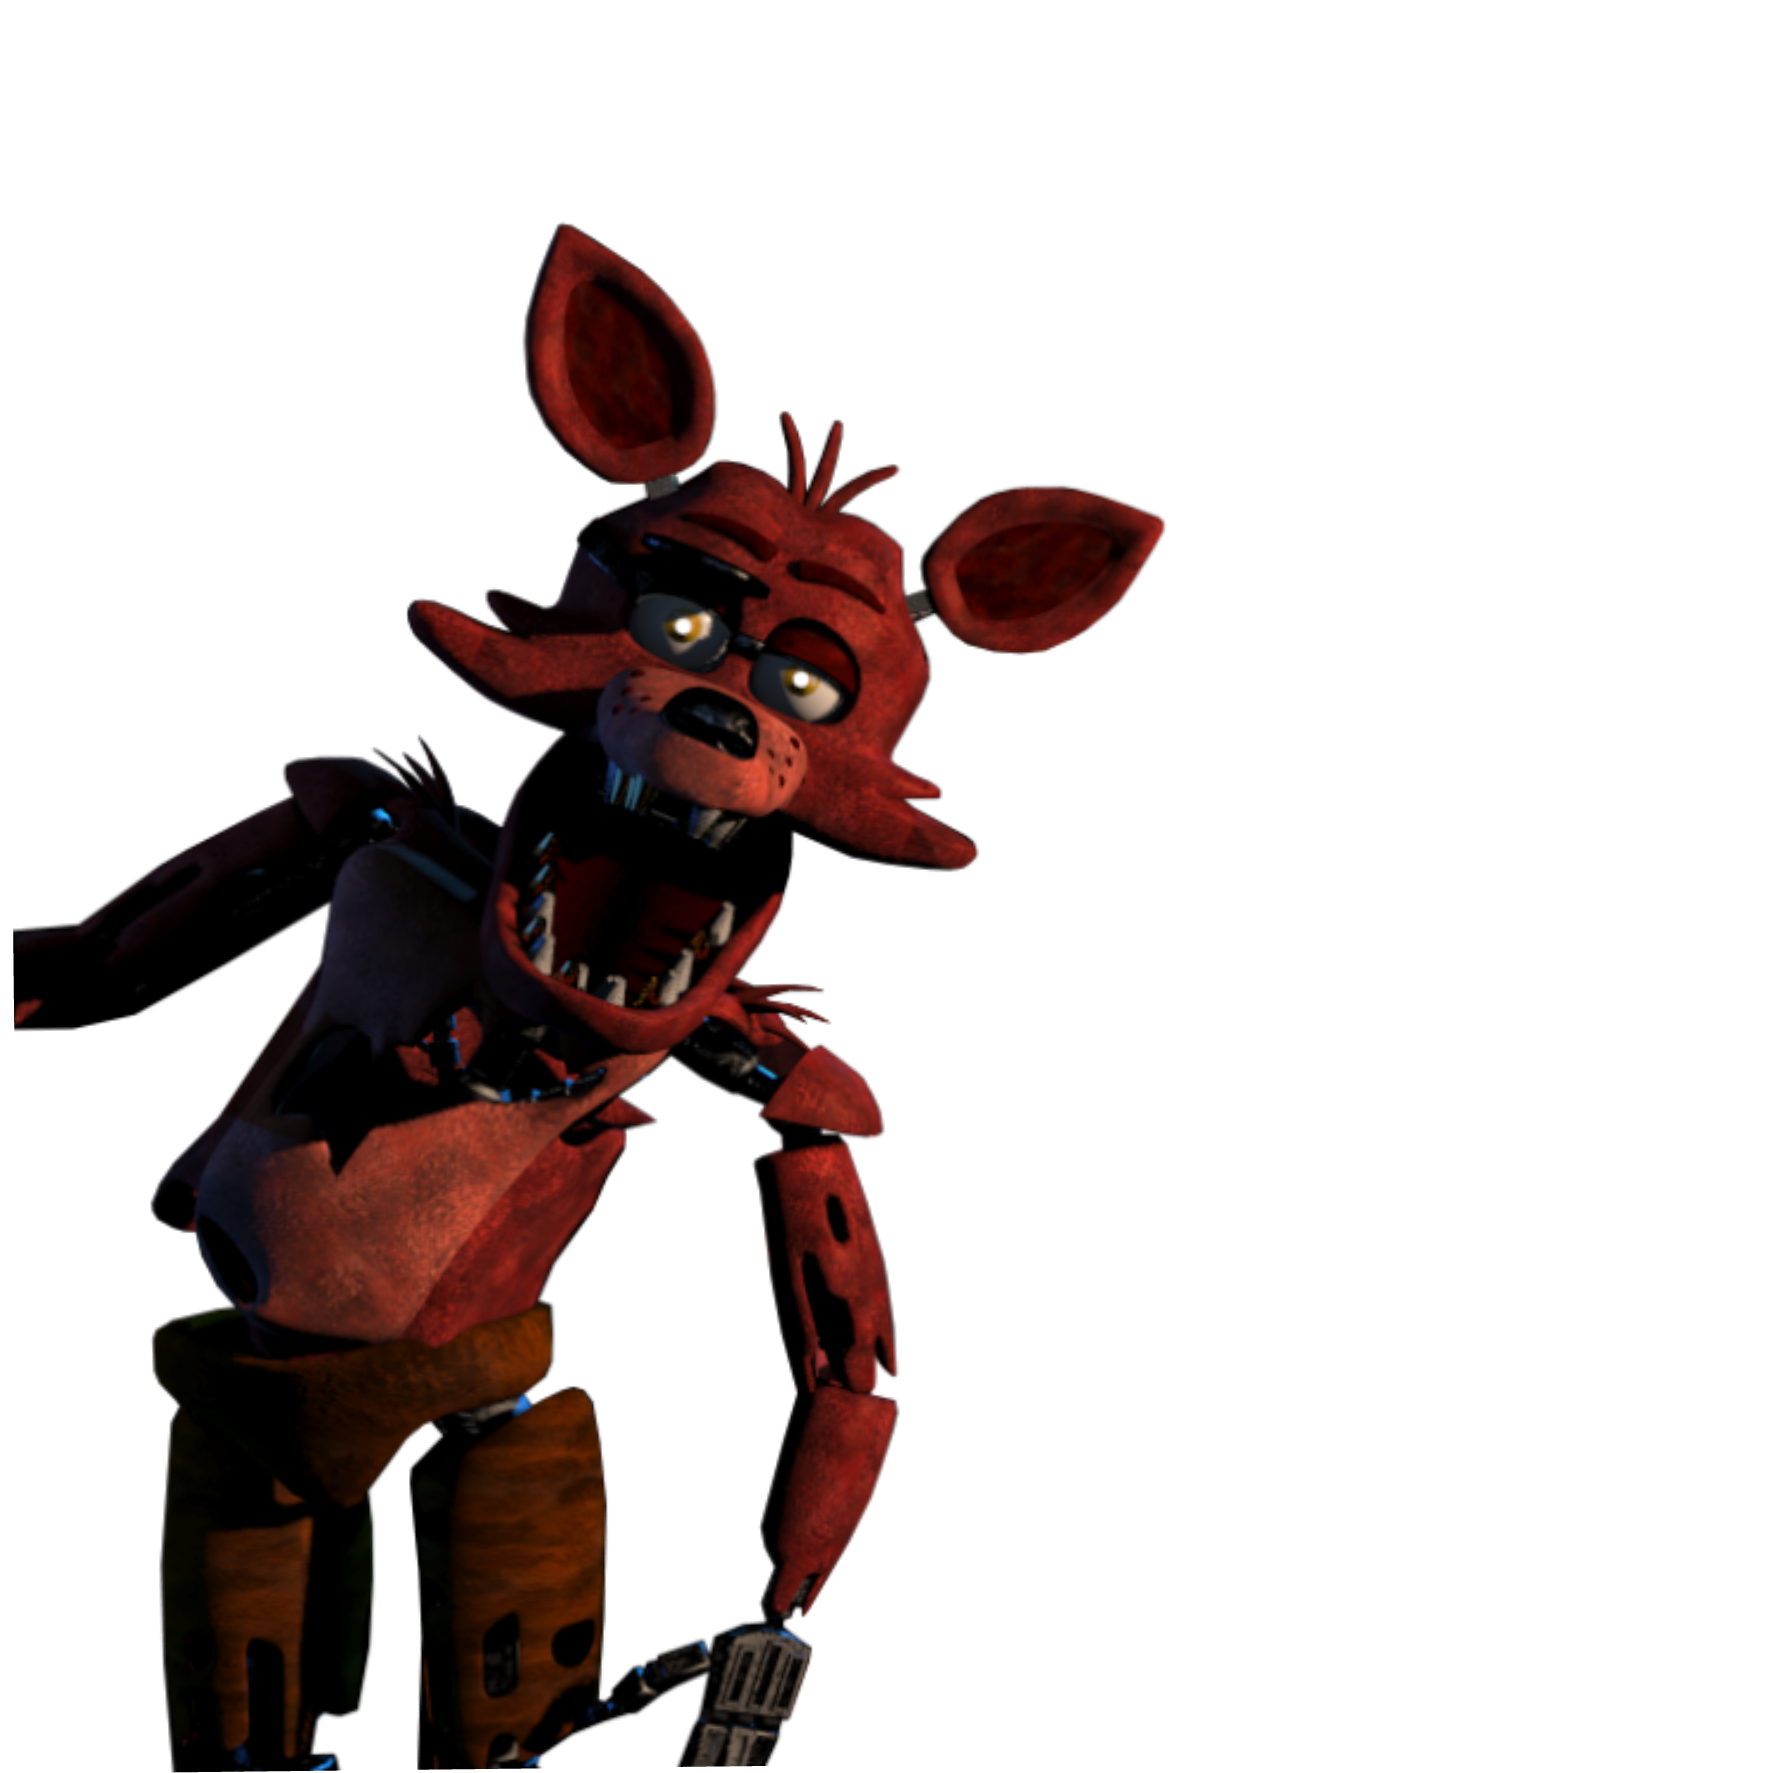 foxy when he jumpscares you in fnaf 1...